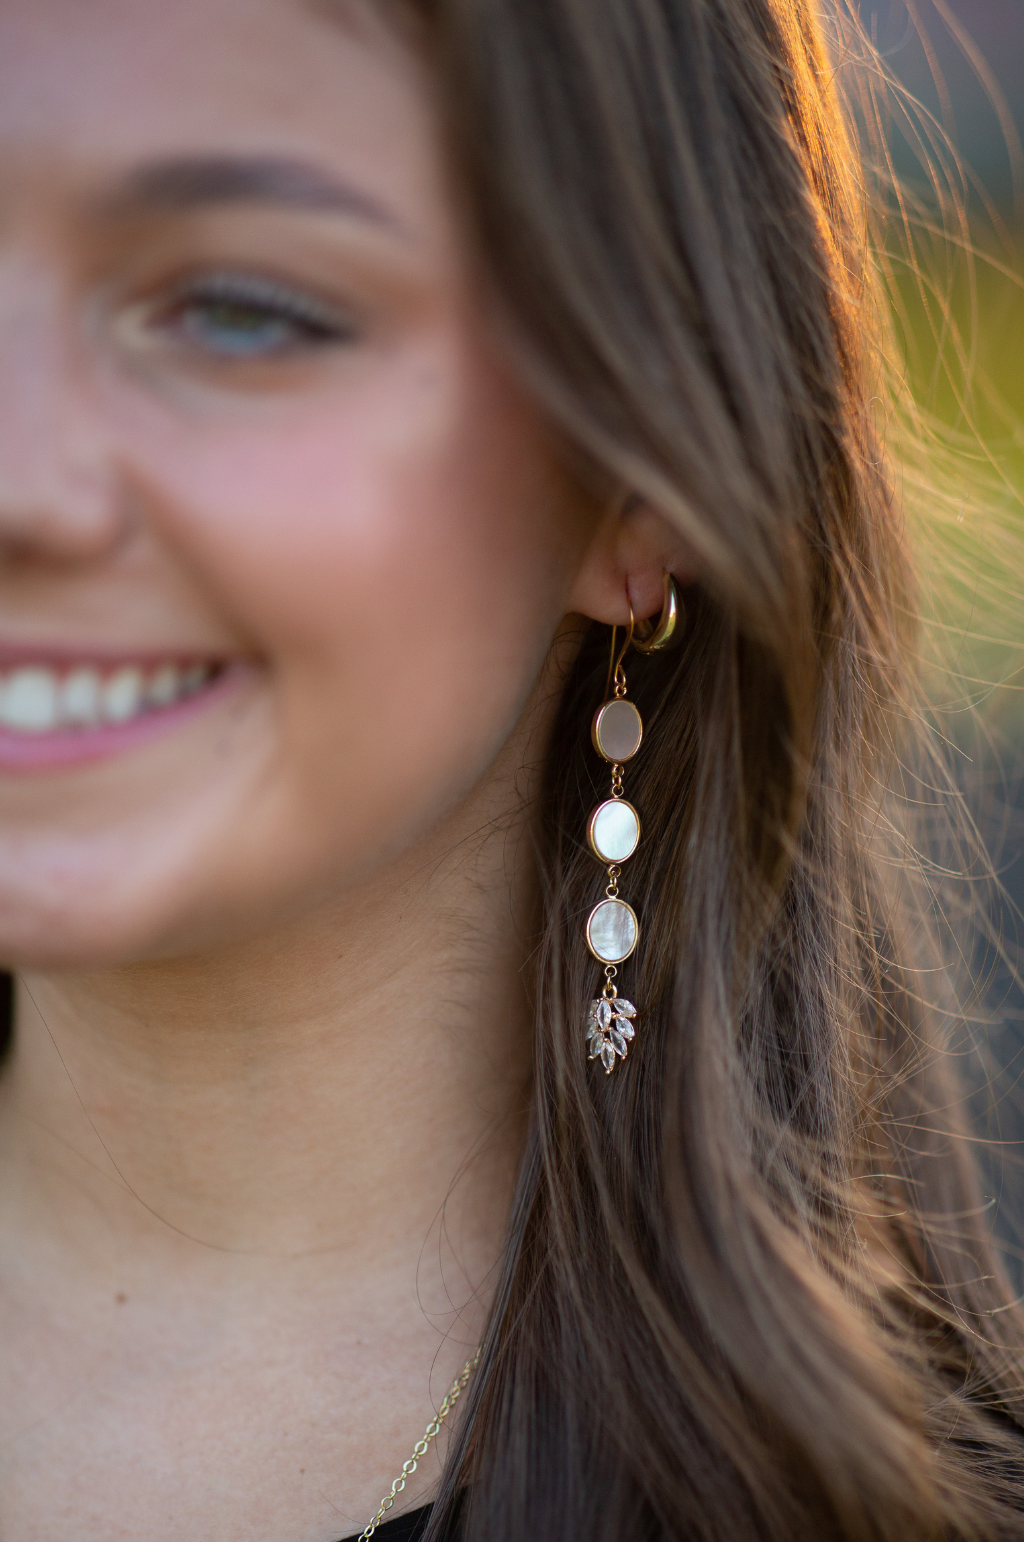 The Magalicious Earrings by Annie Claire Designs - SoSis